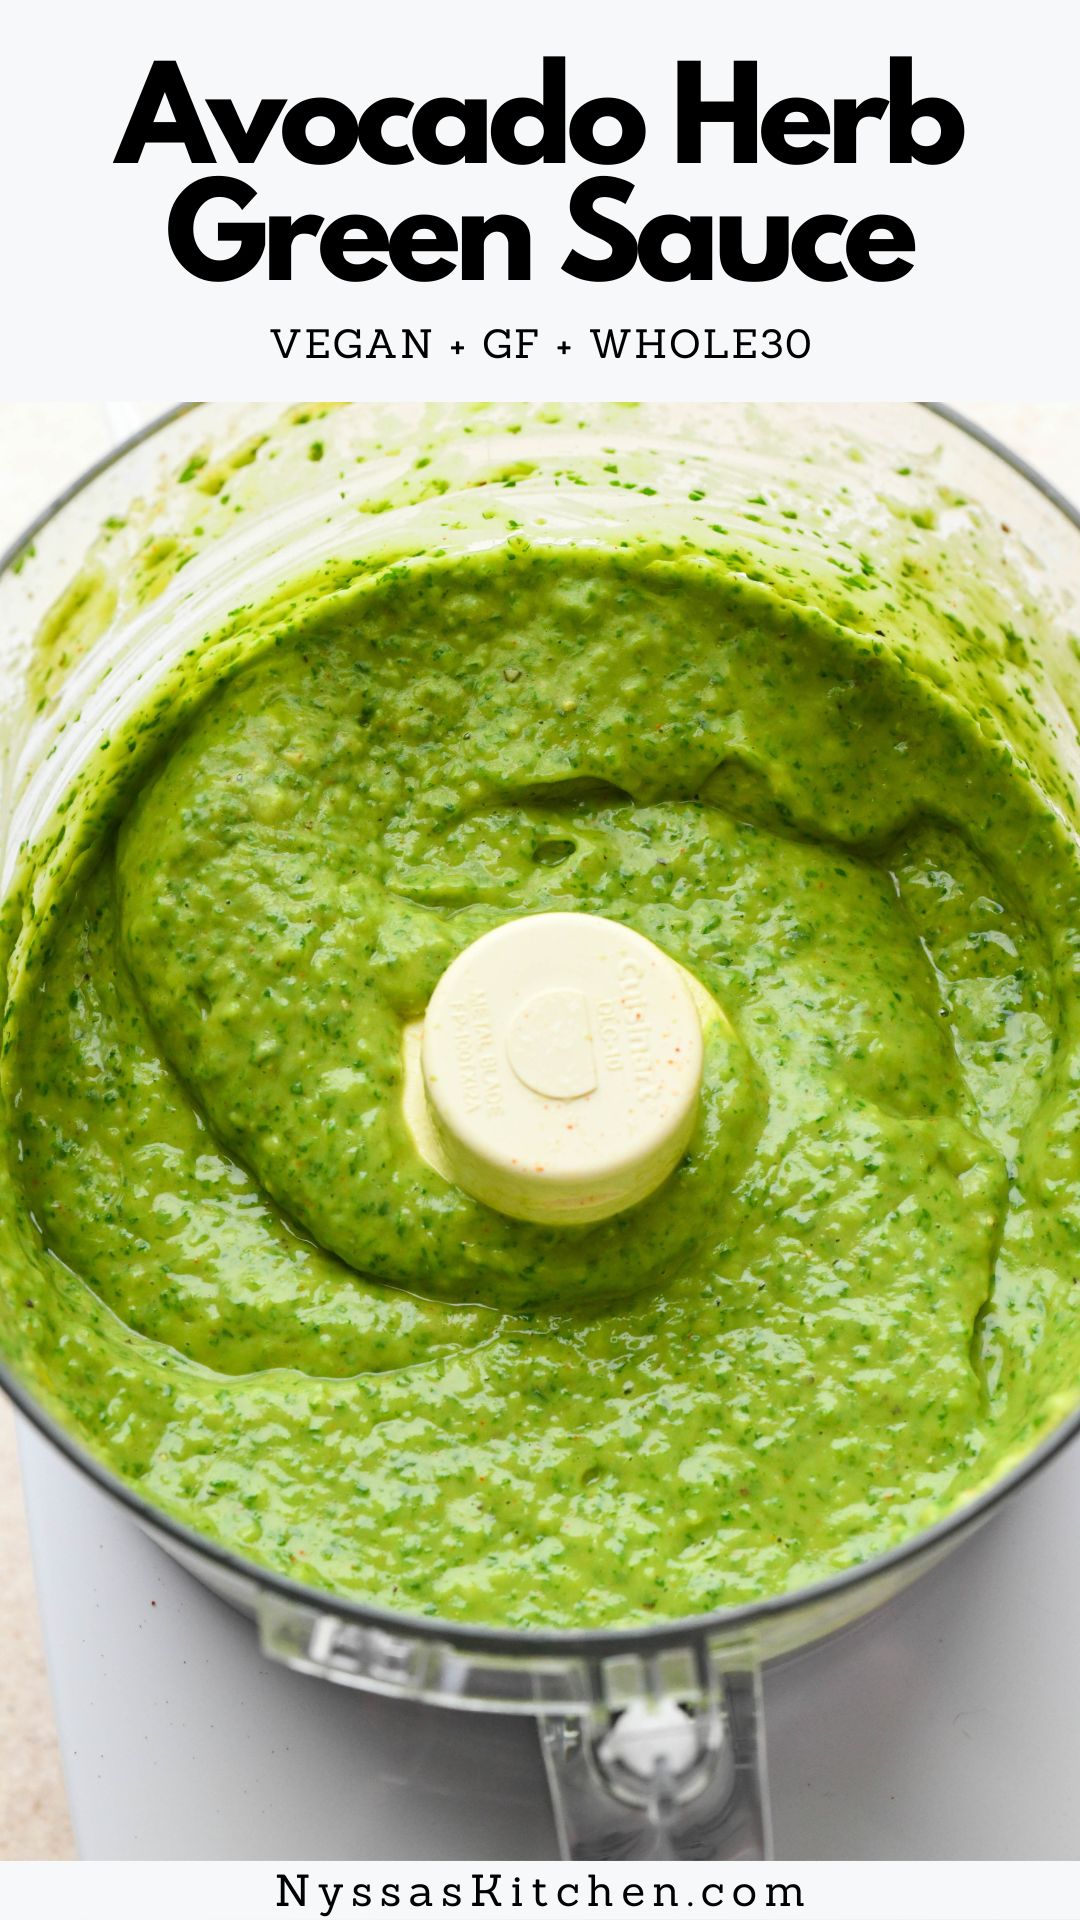 This avocado herb green sauce is the best all purpose green sauce! Perfect for everything from tacos to salads. Healthy, full of bright green flavor, and ready in only 5 minutes. Vegan, vegetarian, gluten free, Whole30, and paleo.